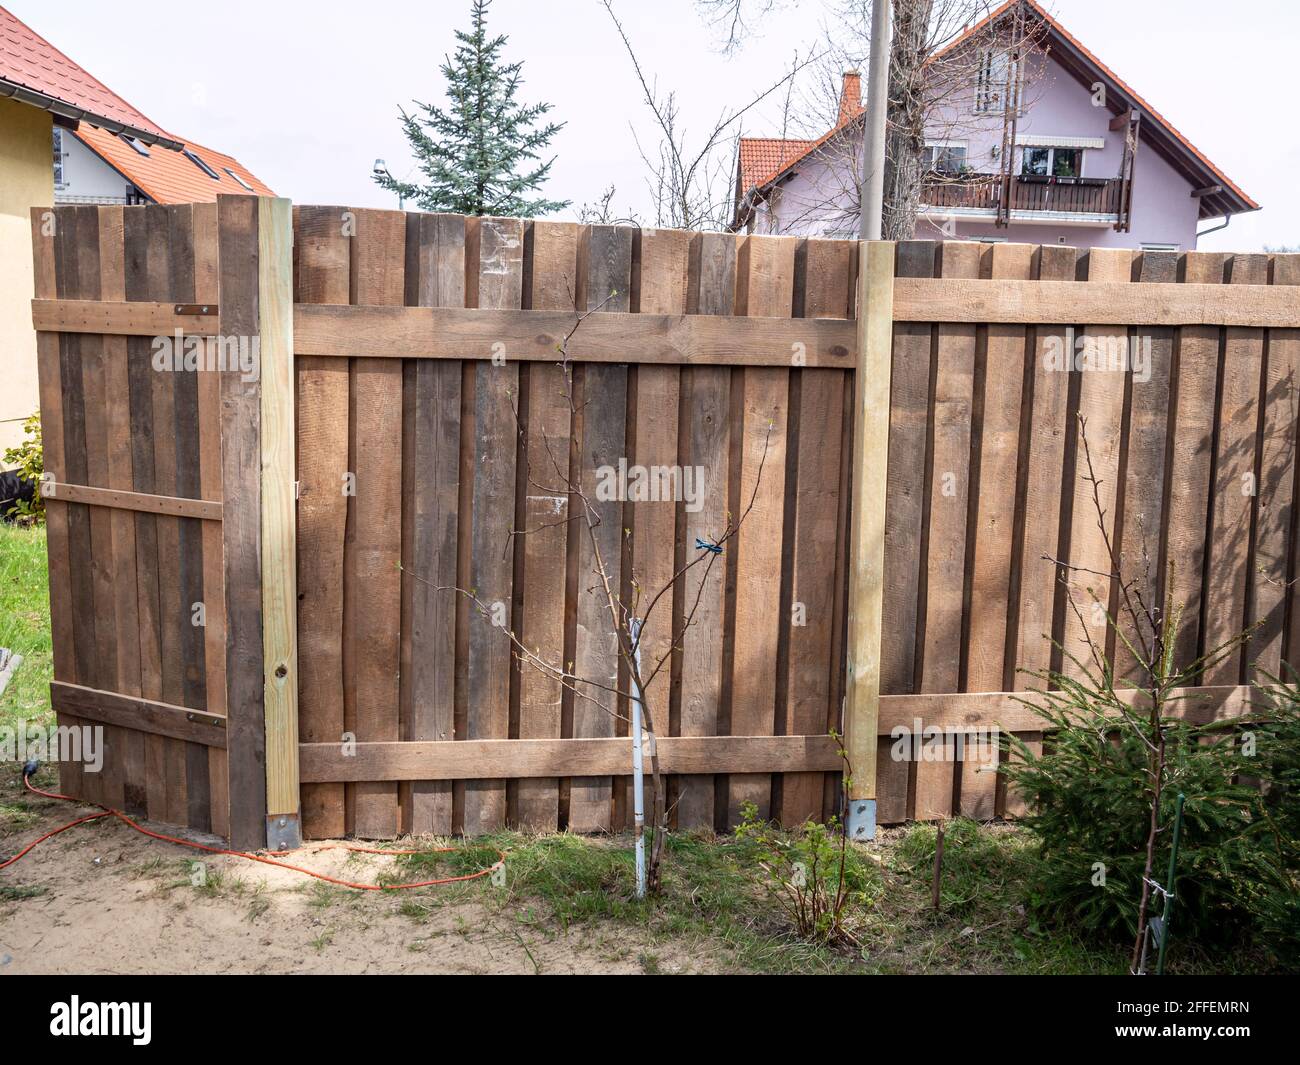 New fence is being built in the property Stock Photo